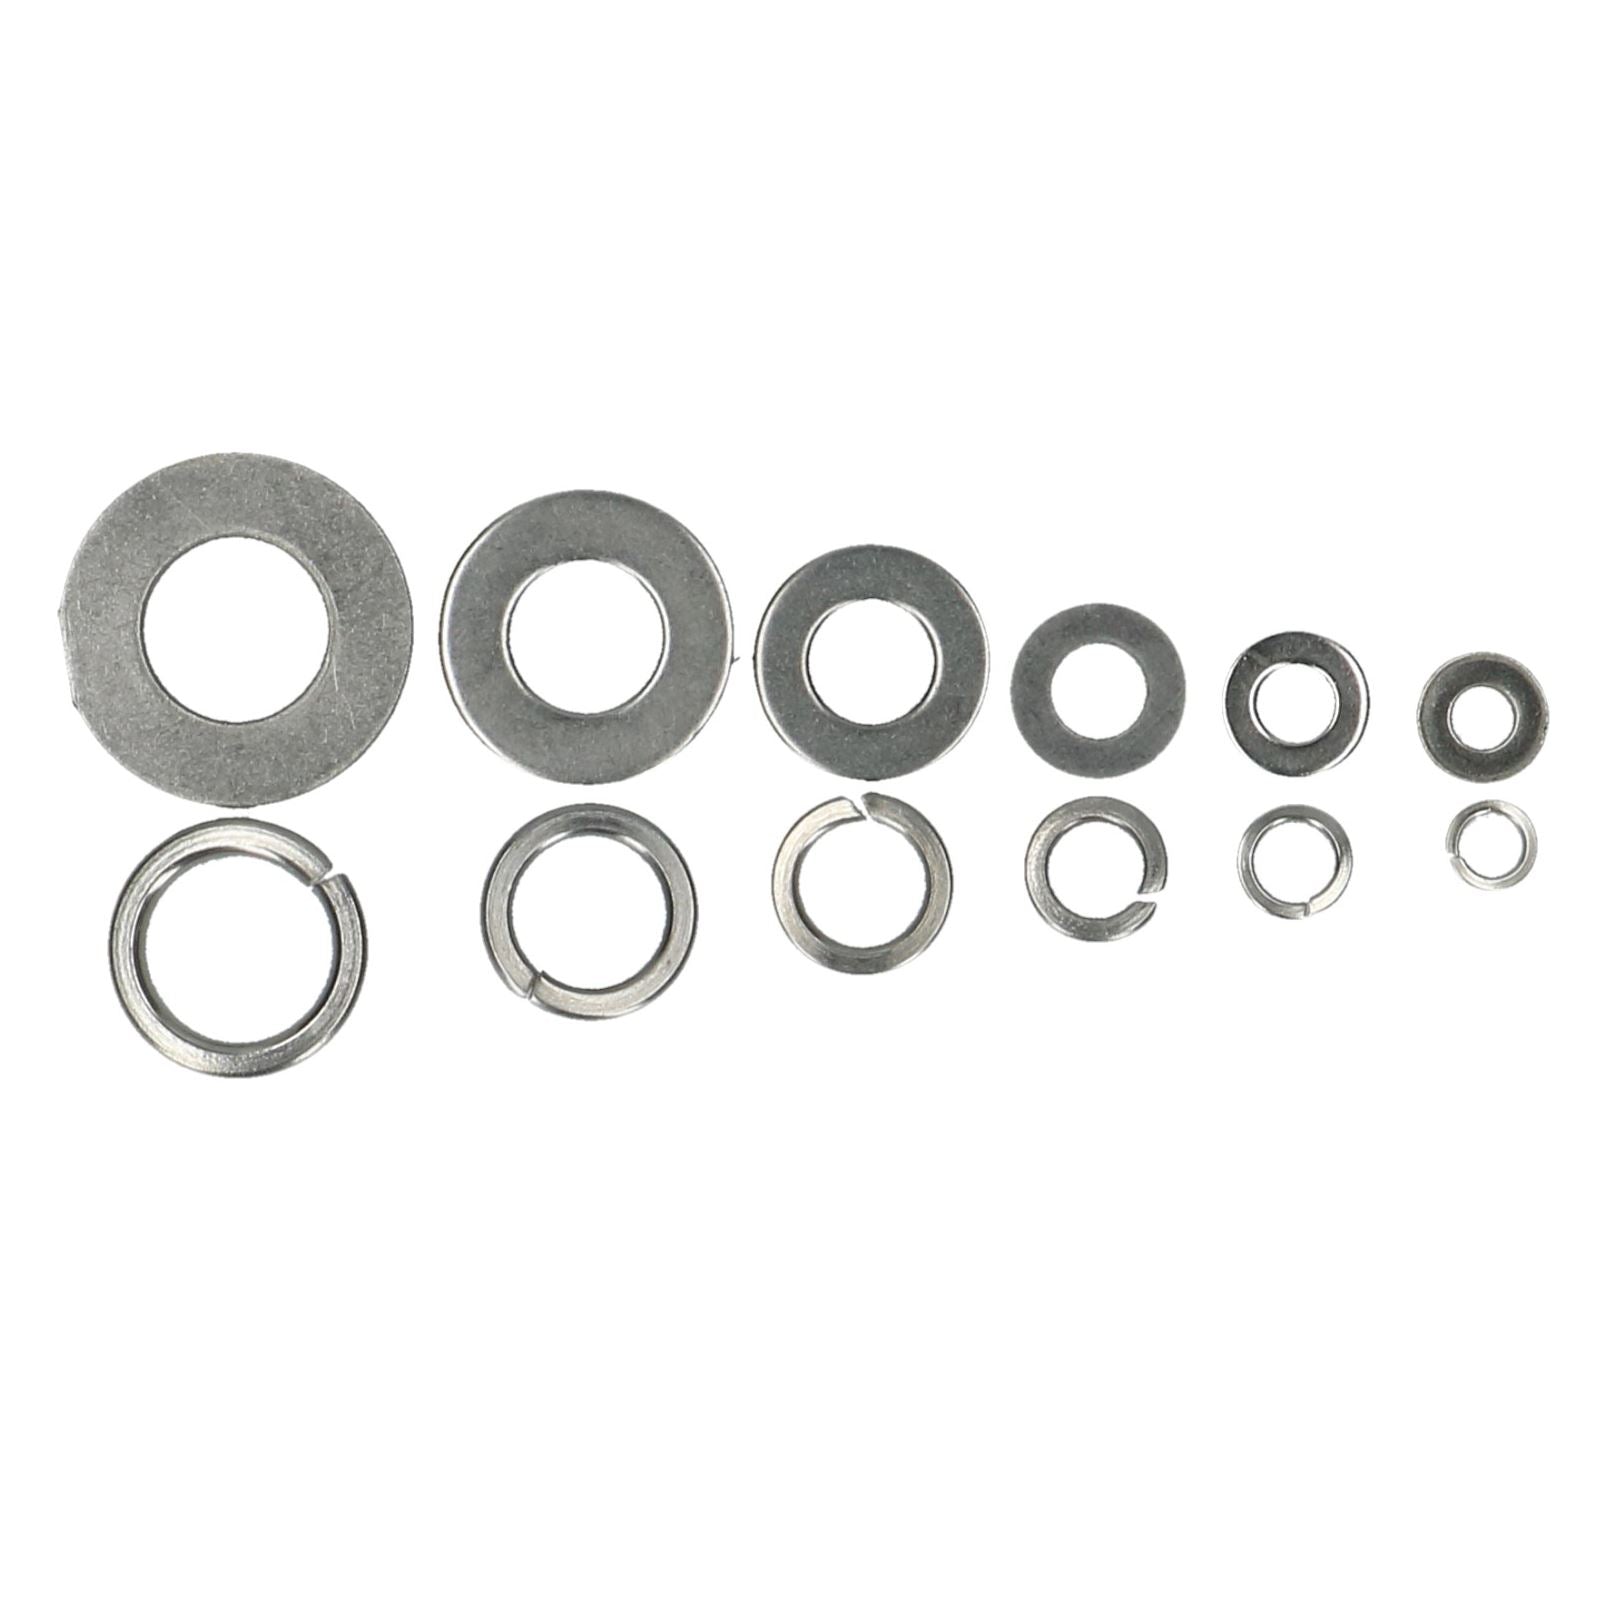 790pc Flat & Spring Washers Stainless Steel Rust Resistant Assortment Kit M4-M12